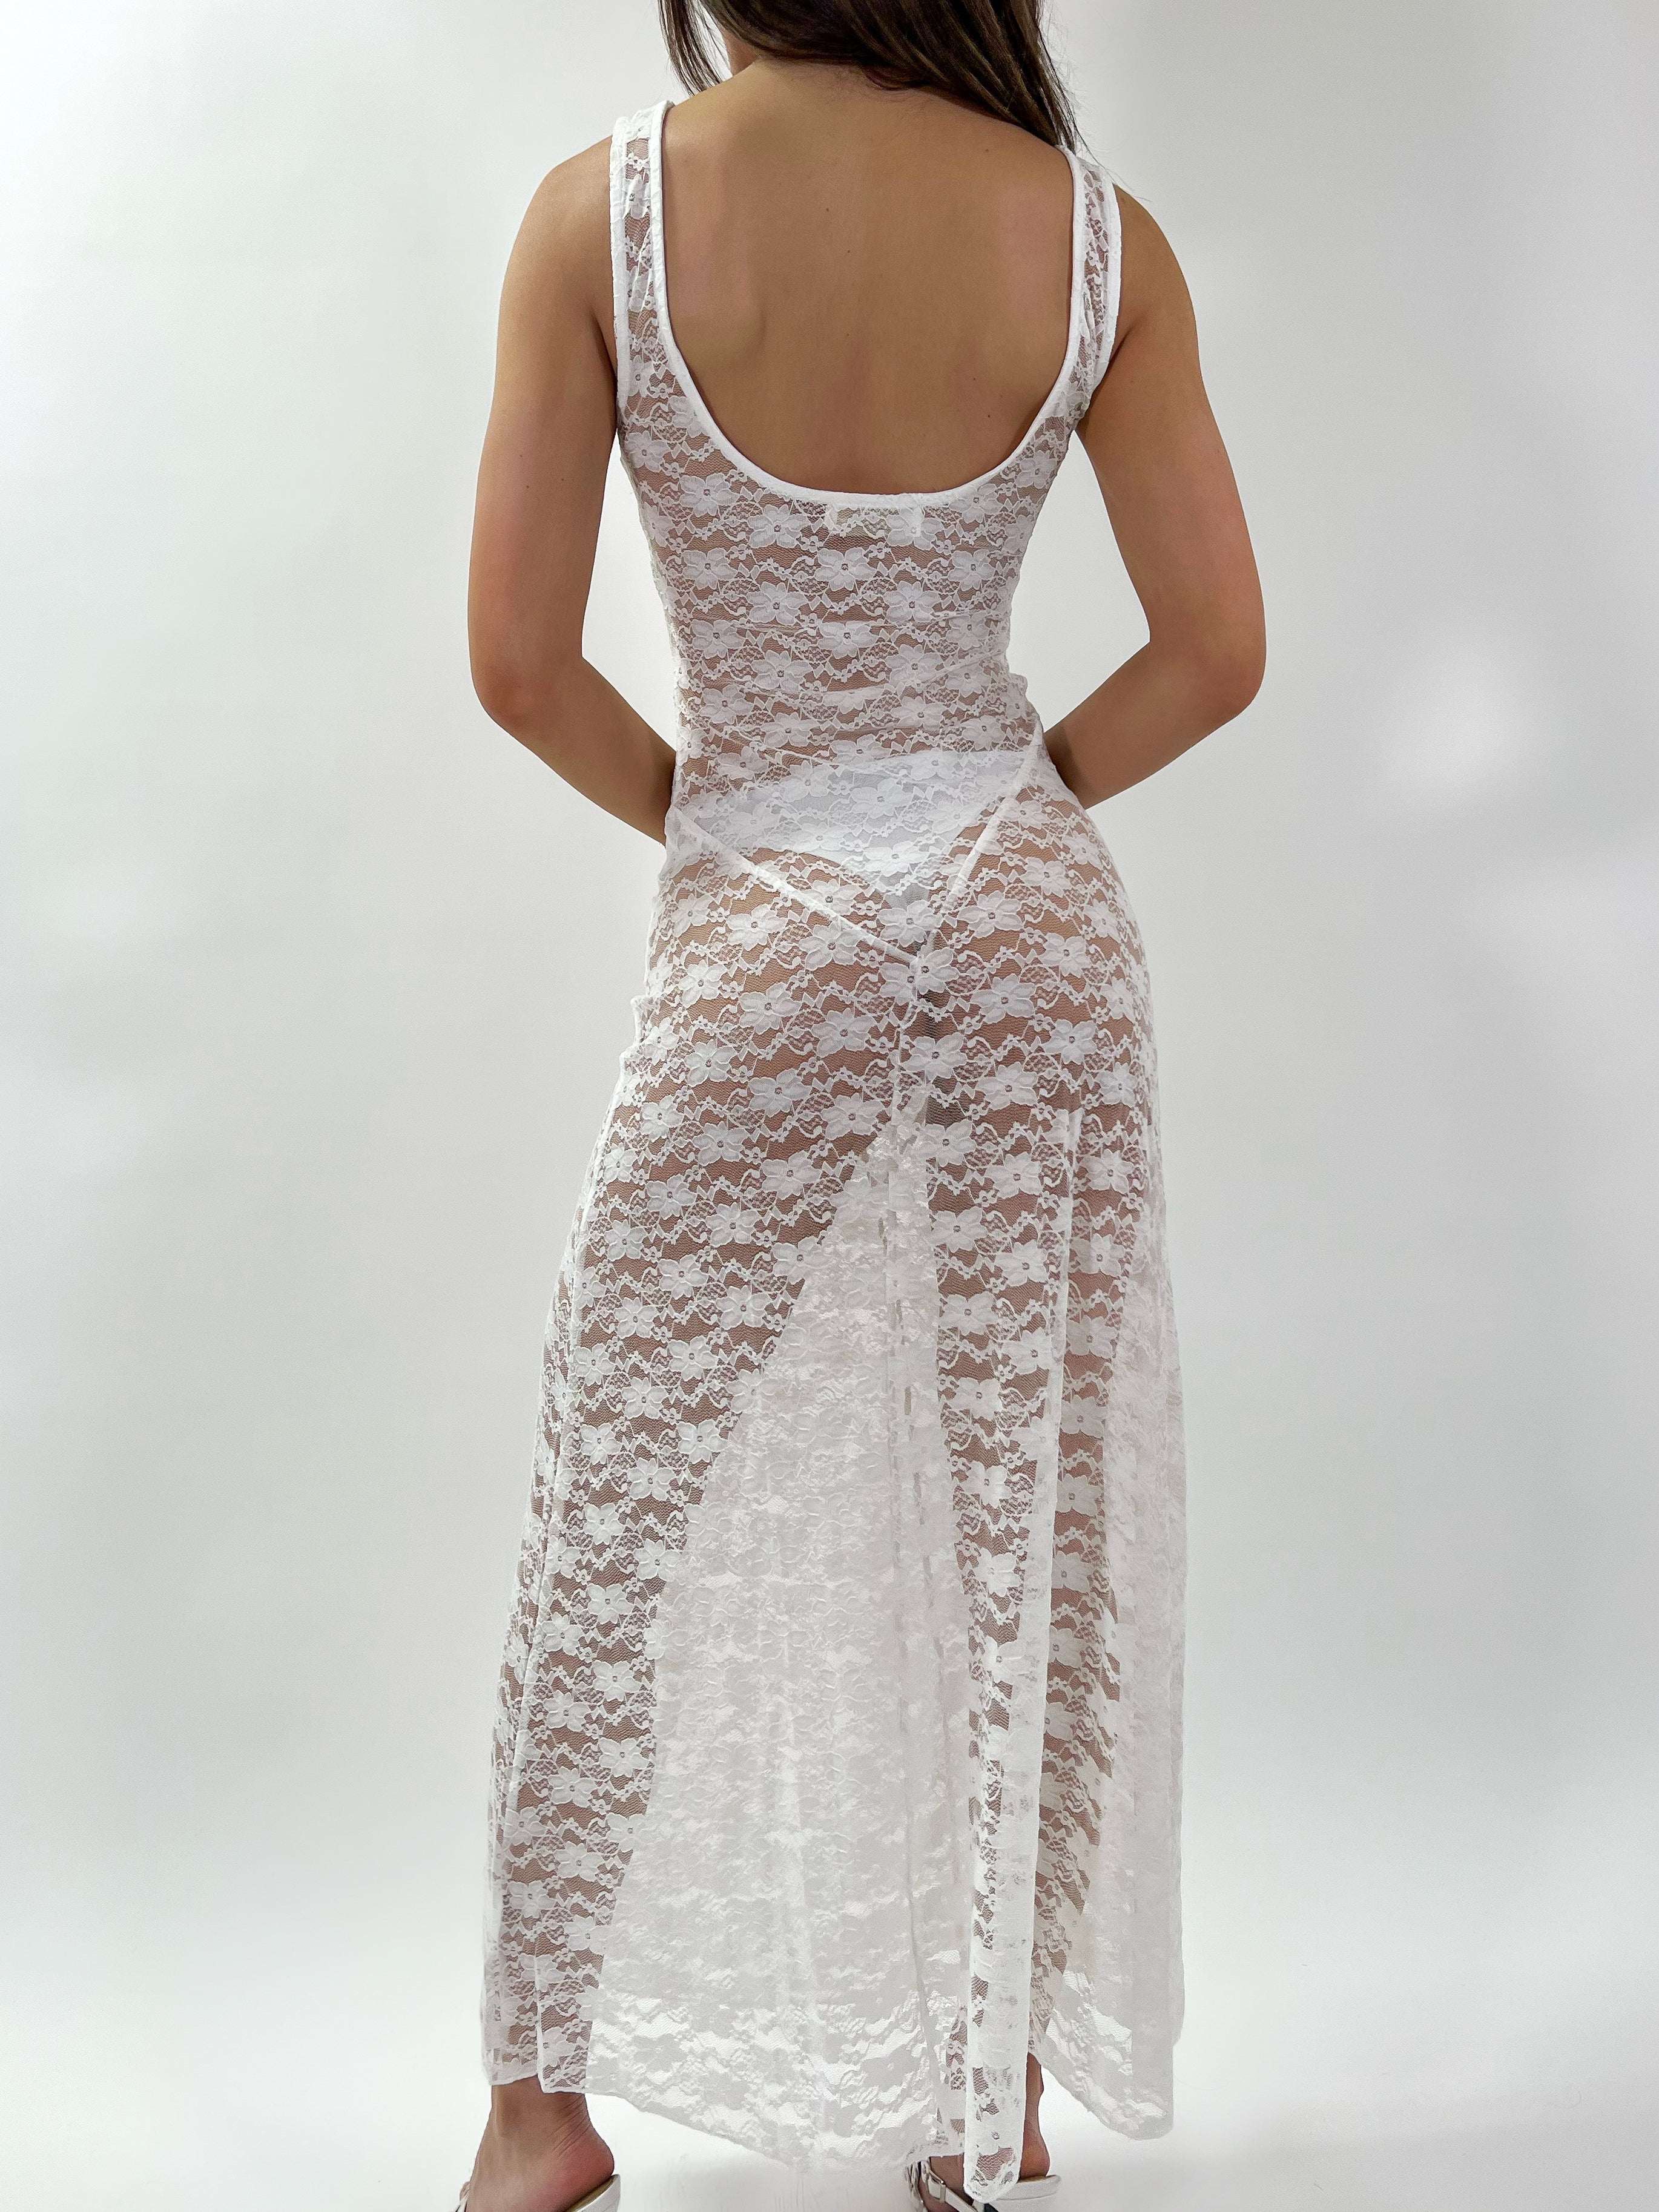 White Sheer Lace Dress